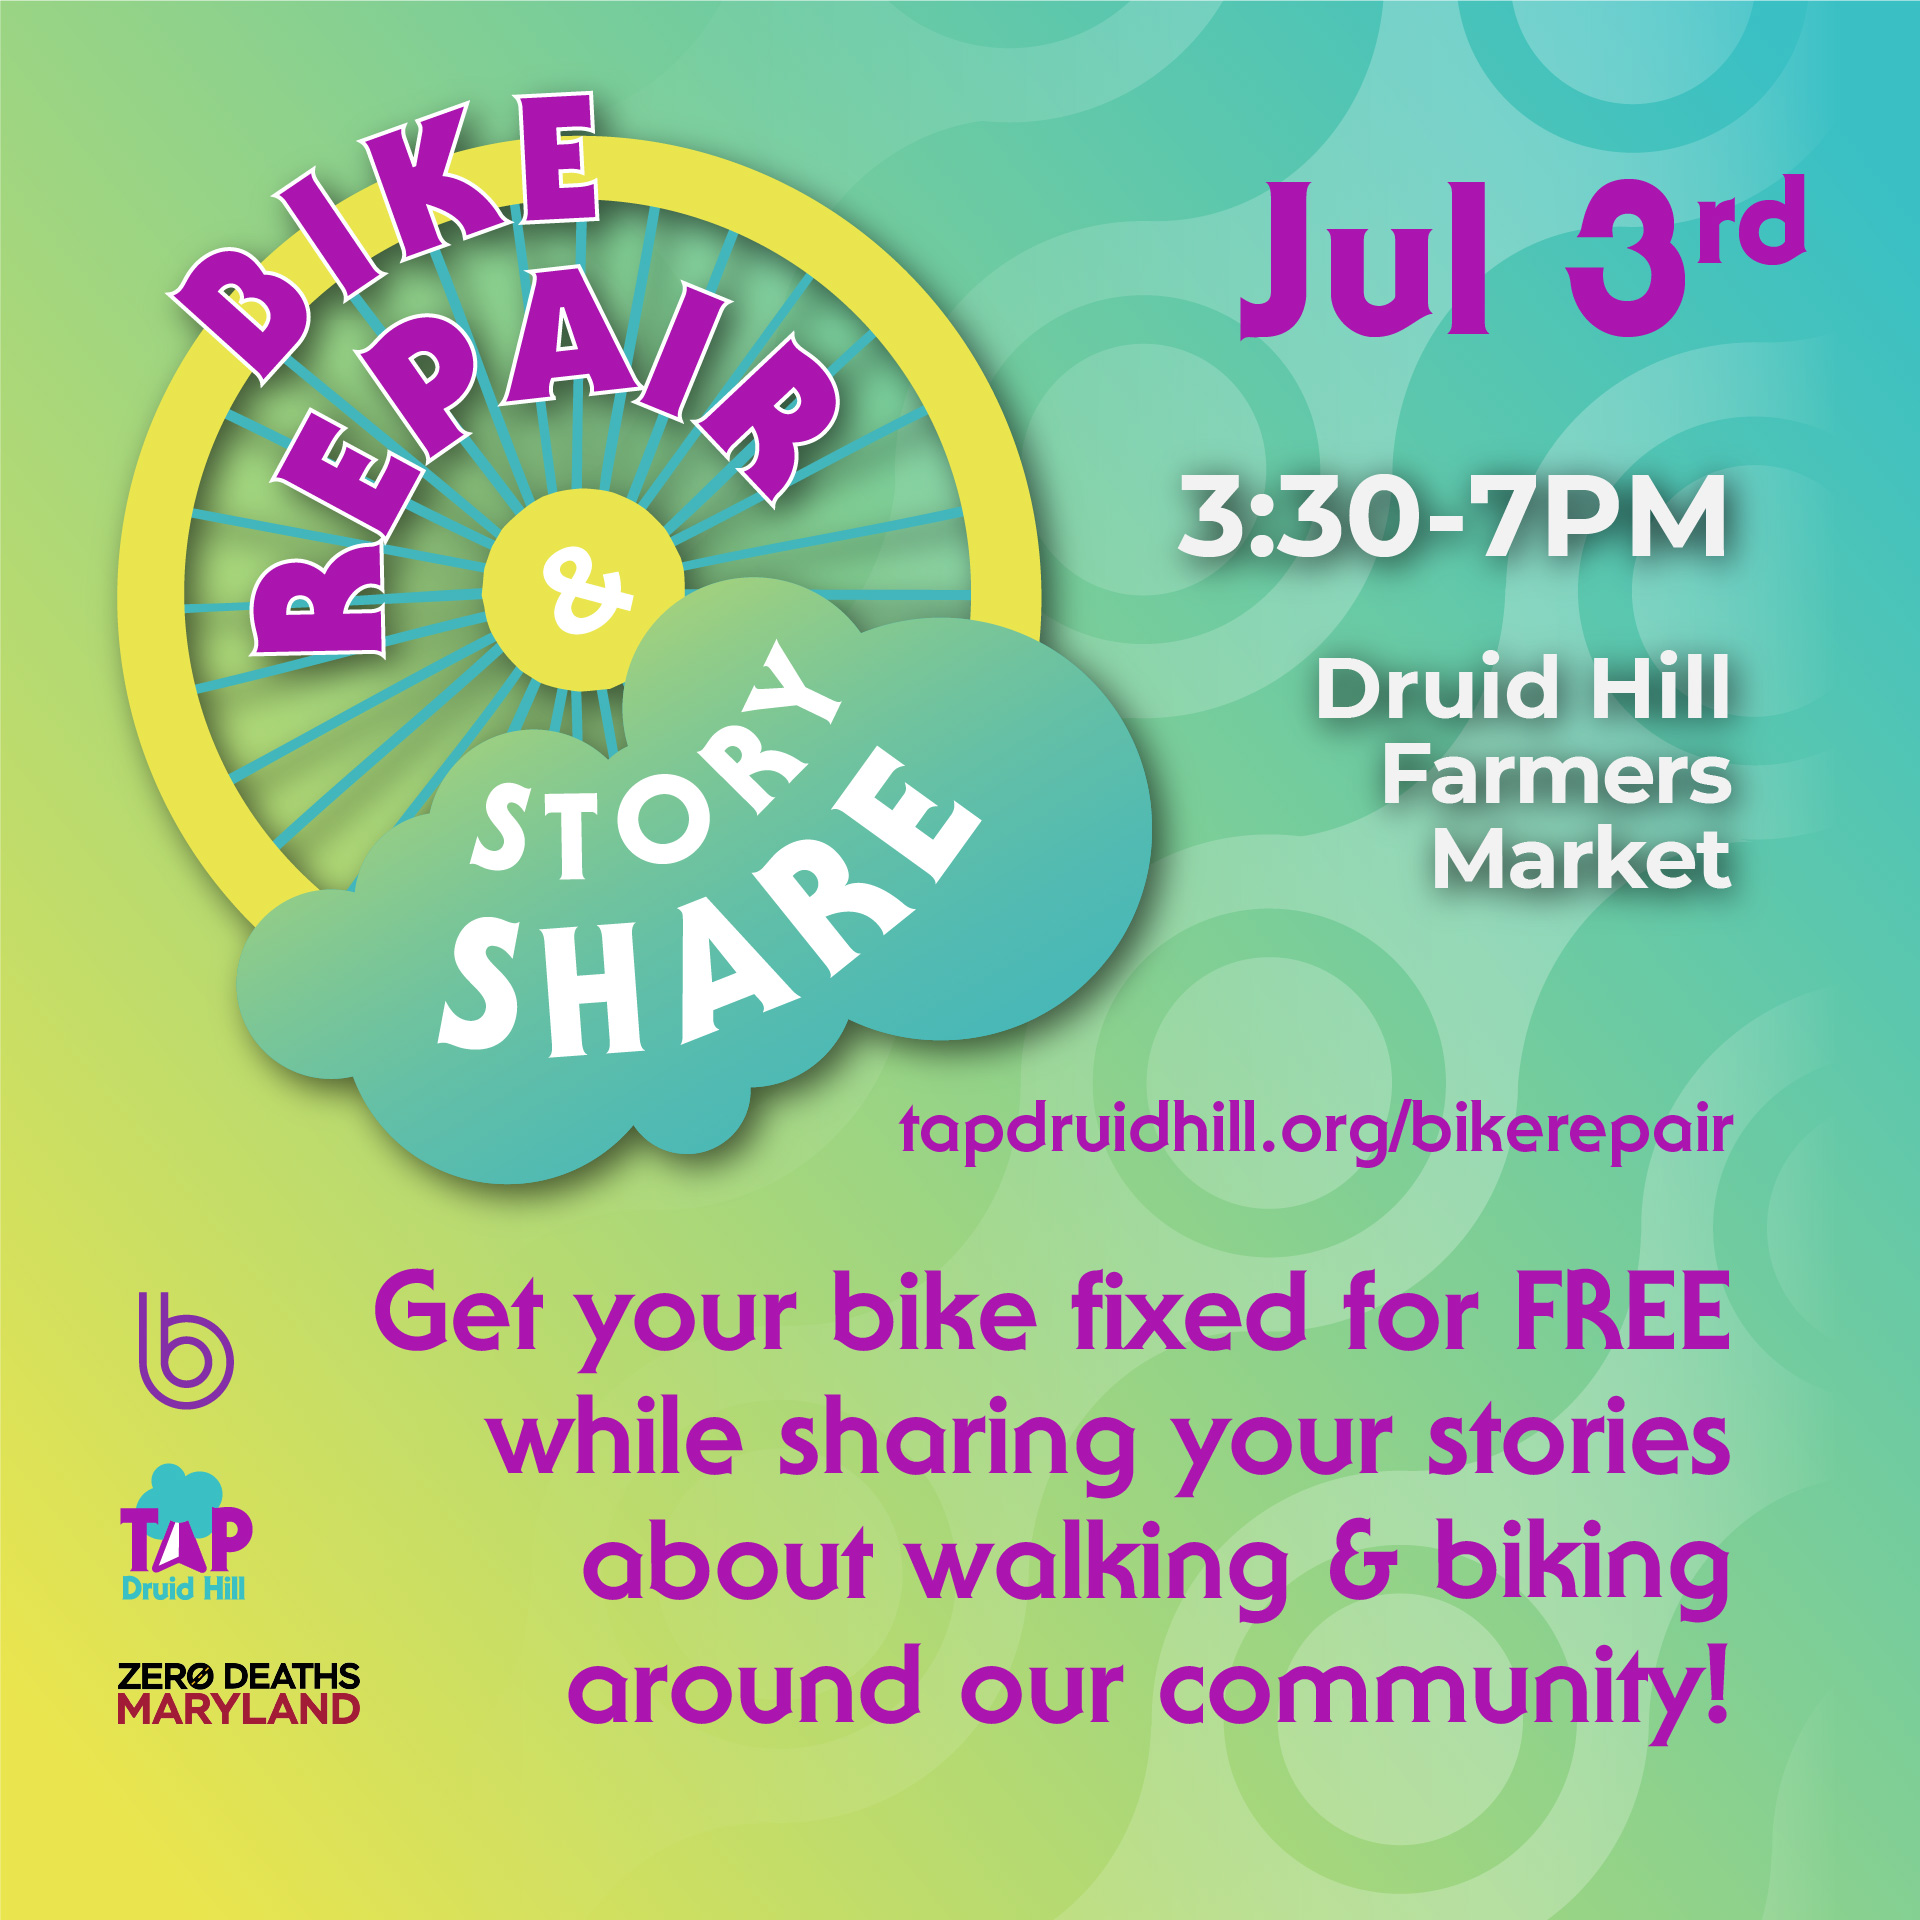 Bike Repair & Story Share banner inviting the readers to "Get your bike fixed for FREE while sharing your stories about walking & biking!" on July 3rd, 2024 3:30-7pm at the Druid Hill Farmers Market